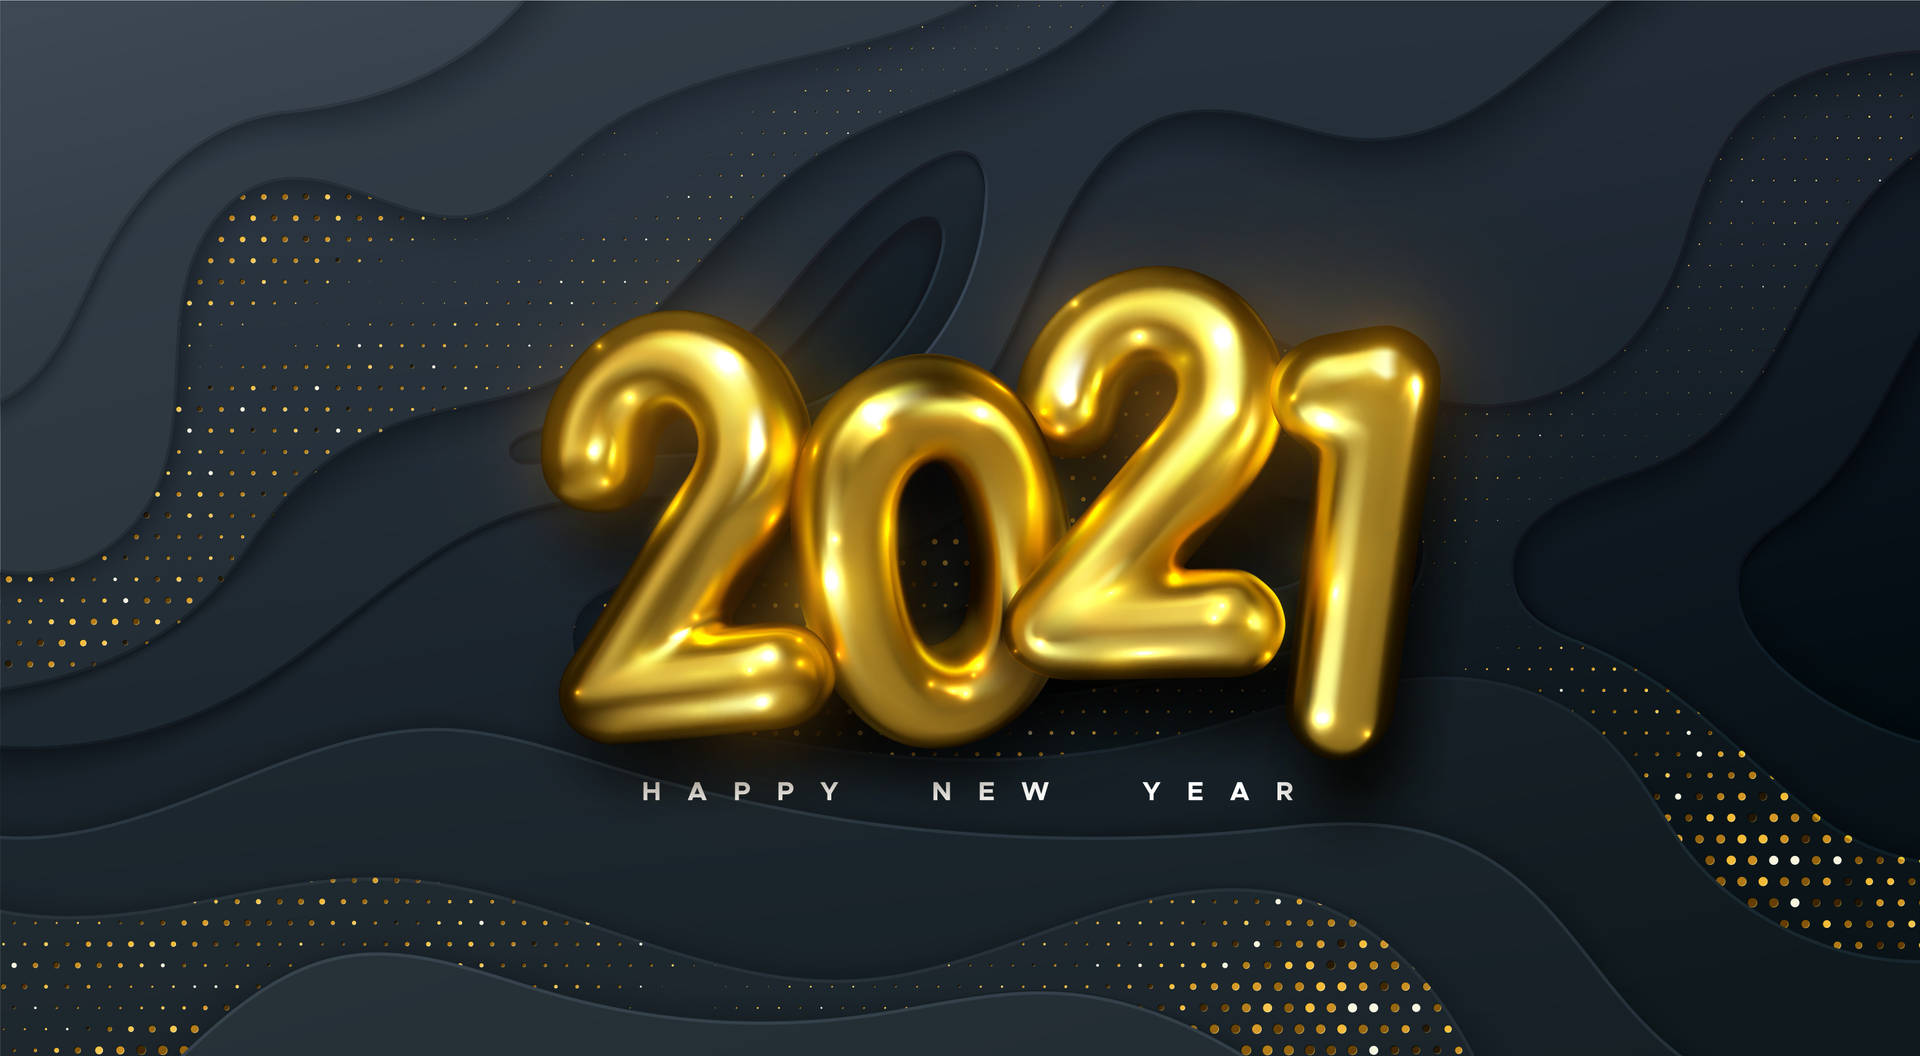 Yellow Foil Happy New Year 2021 Balloons